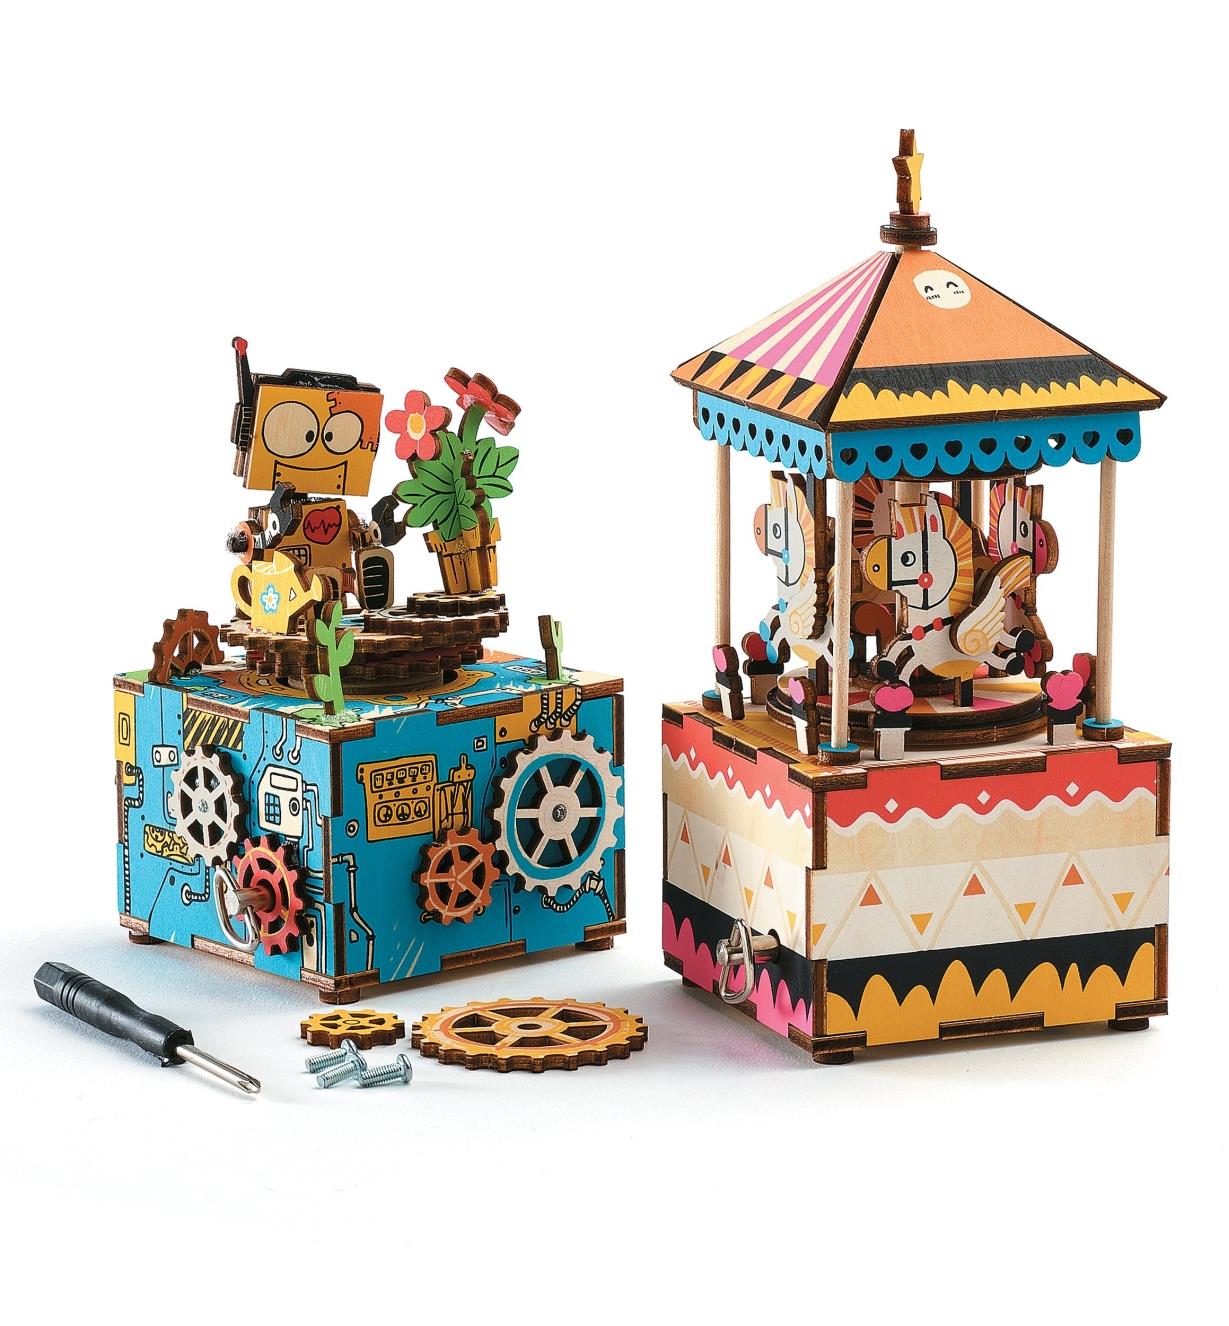 Completed robot and carousel music boxes